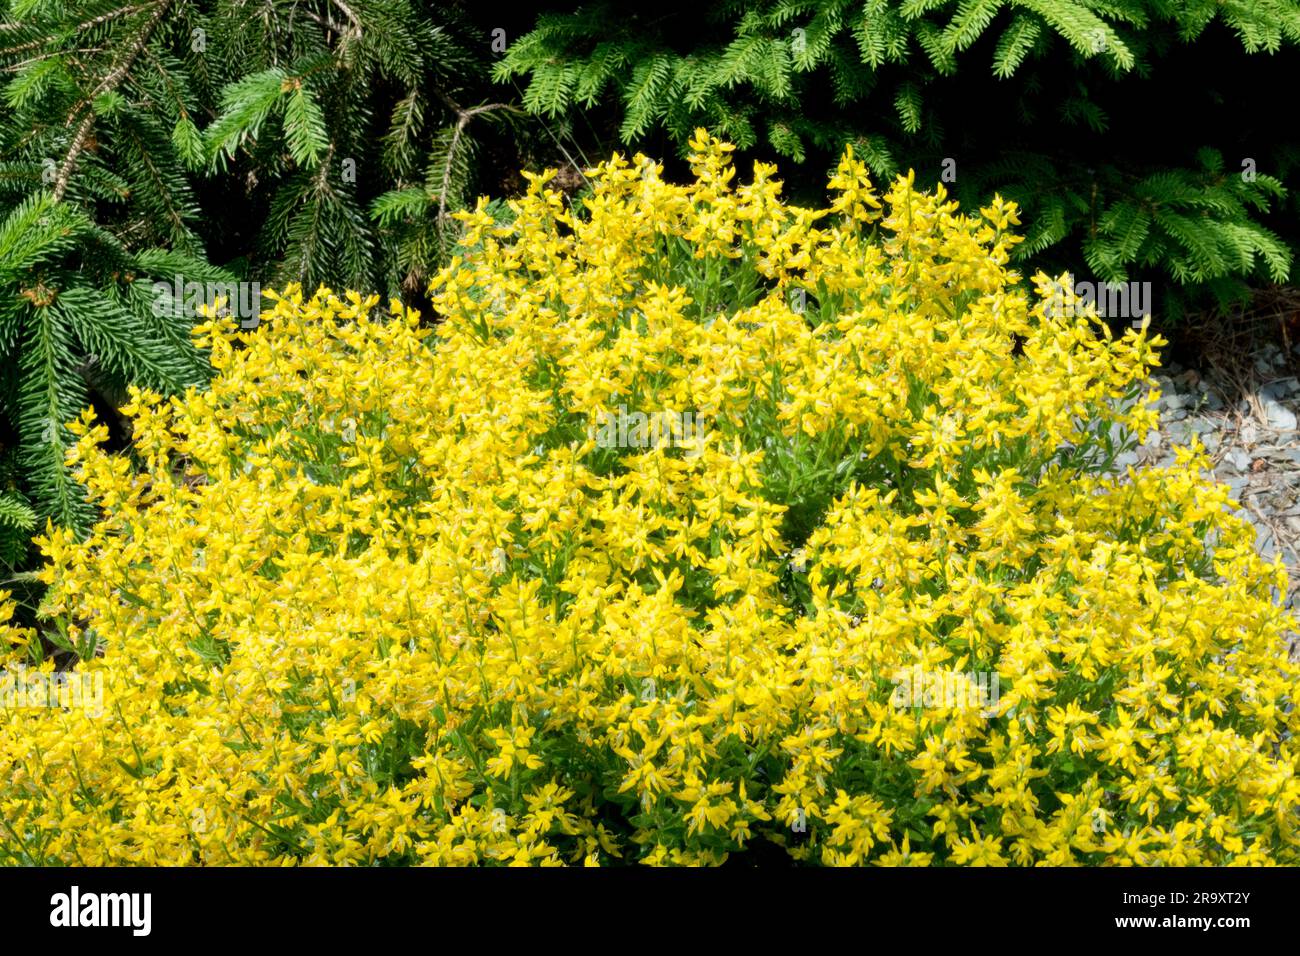 Cushion Clump-forming Garden Genista germanica Tufted Yellow Flowering German Greenweed Genista Flowers Stock Photo